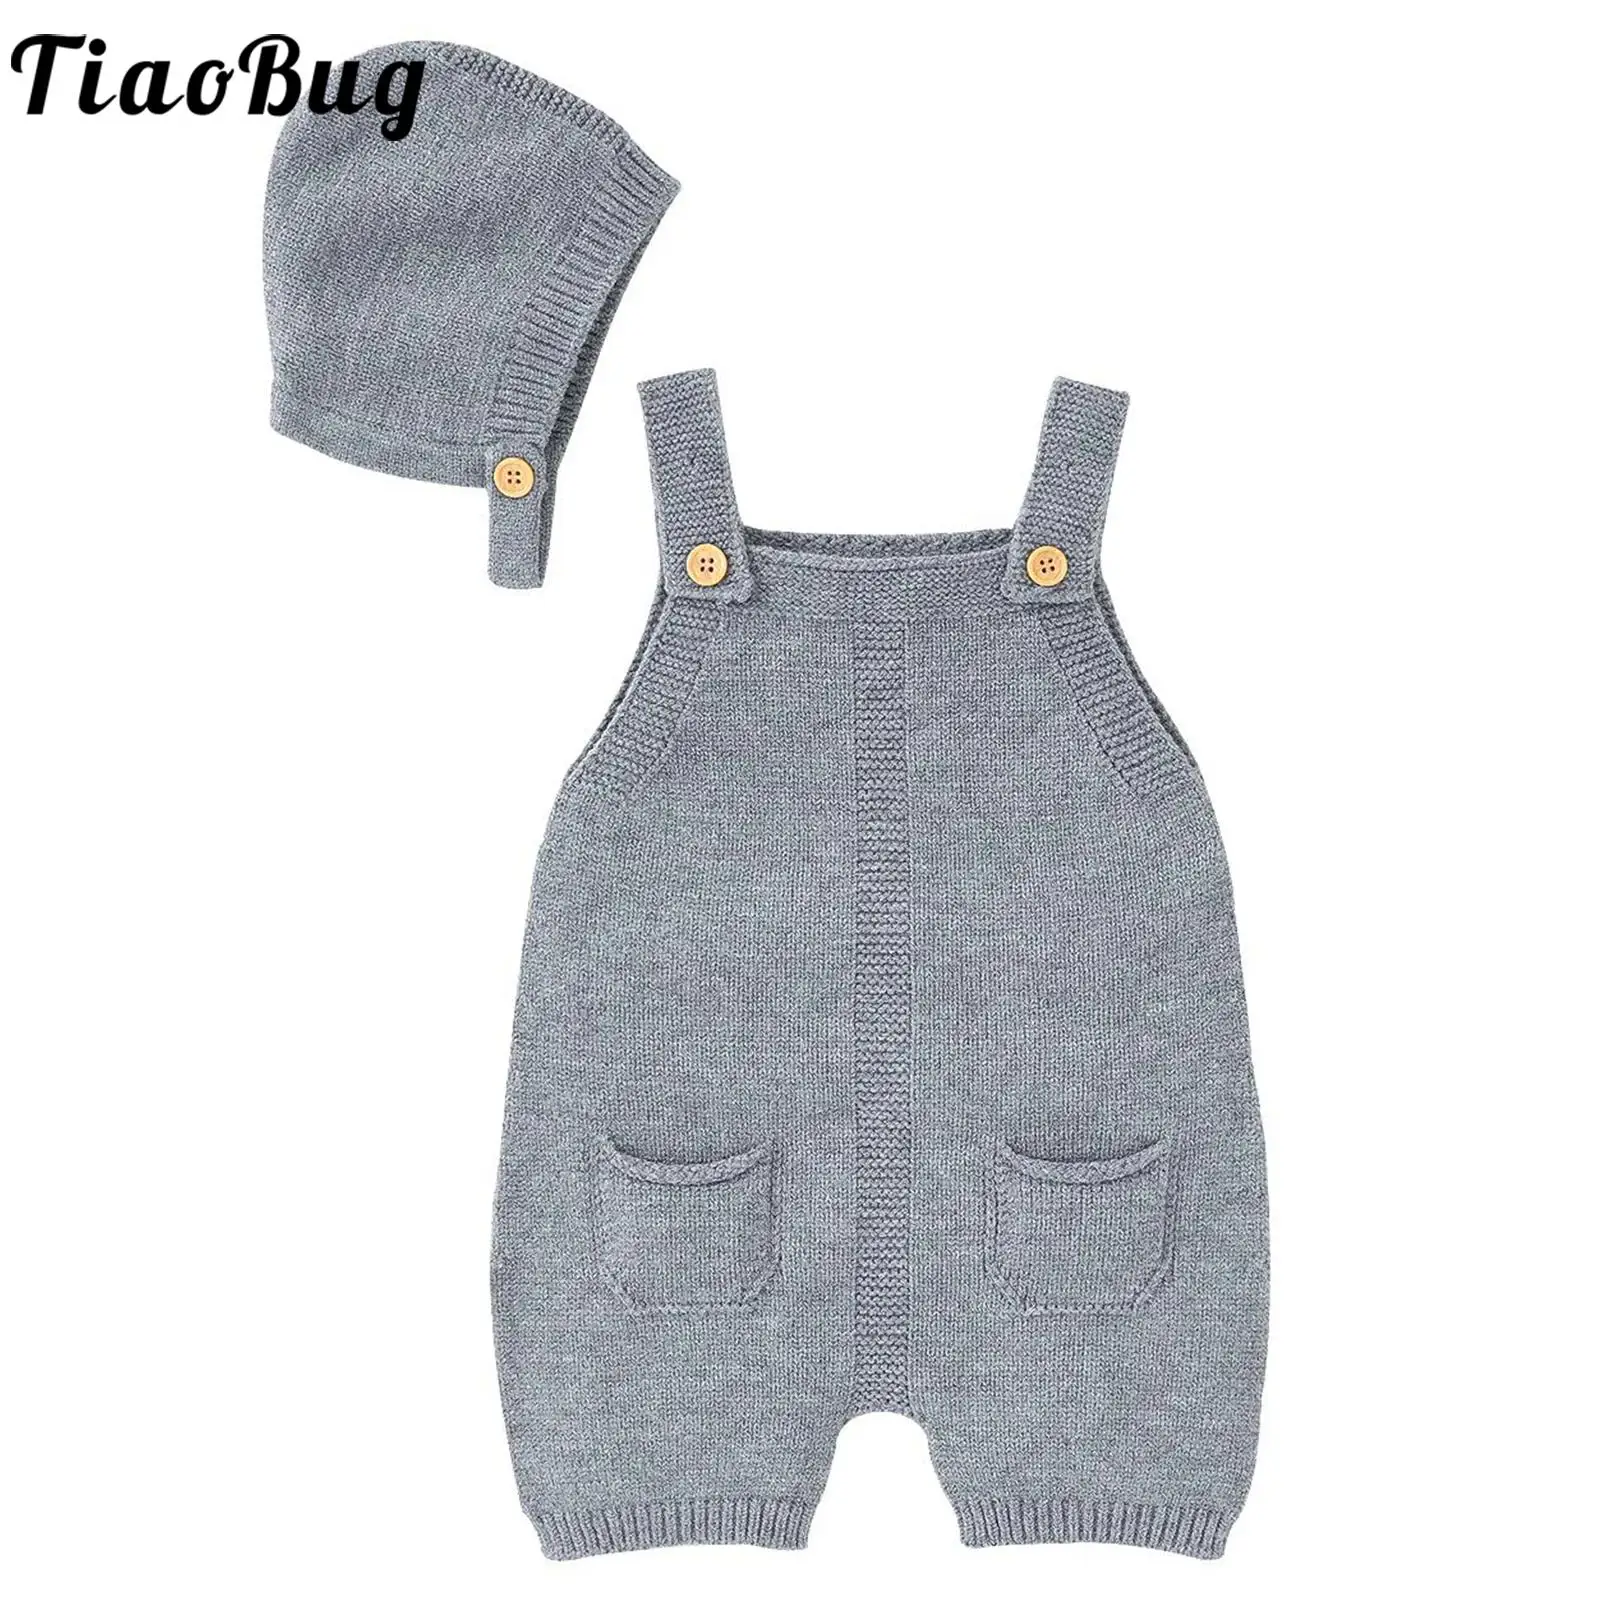 

Baby Girls Boys Warm Knitted Romper Stretchy Suspender Pants Knitwear Overalls Dungarees Sweater Bodysuit Jumpsuit with Hat